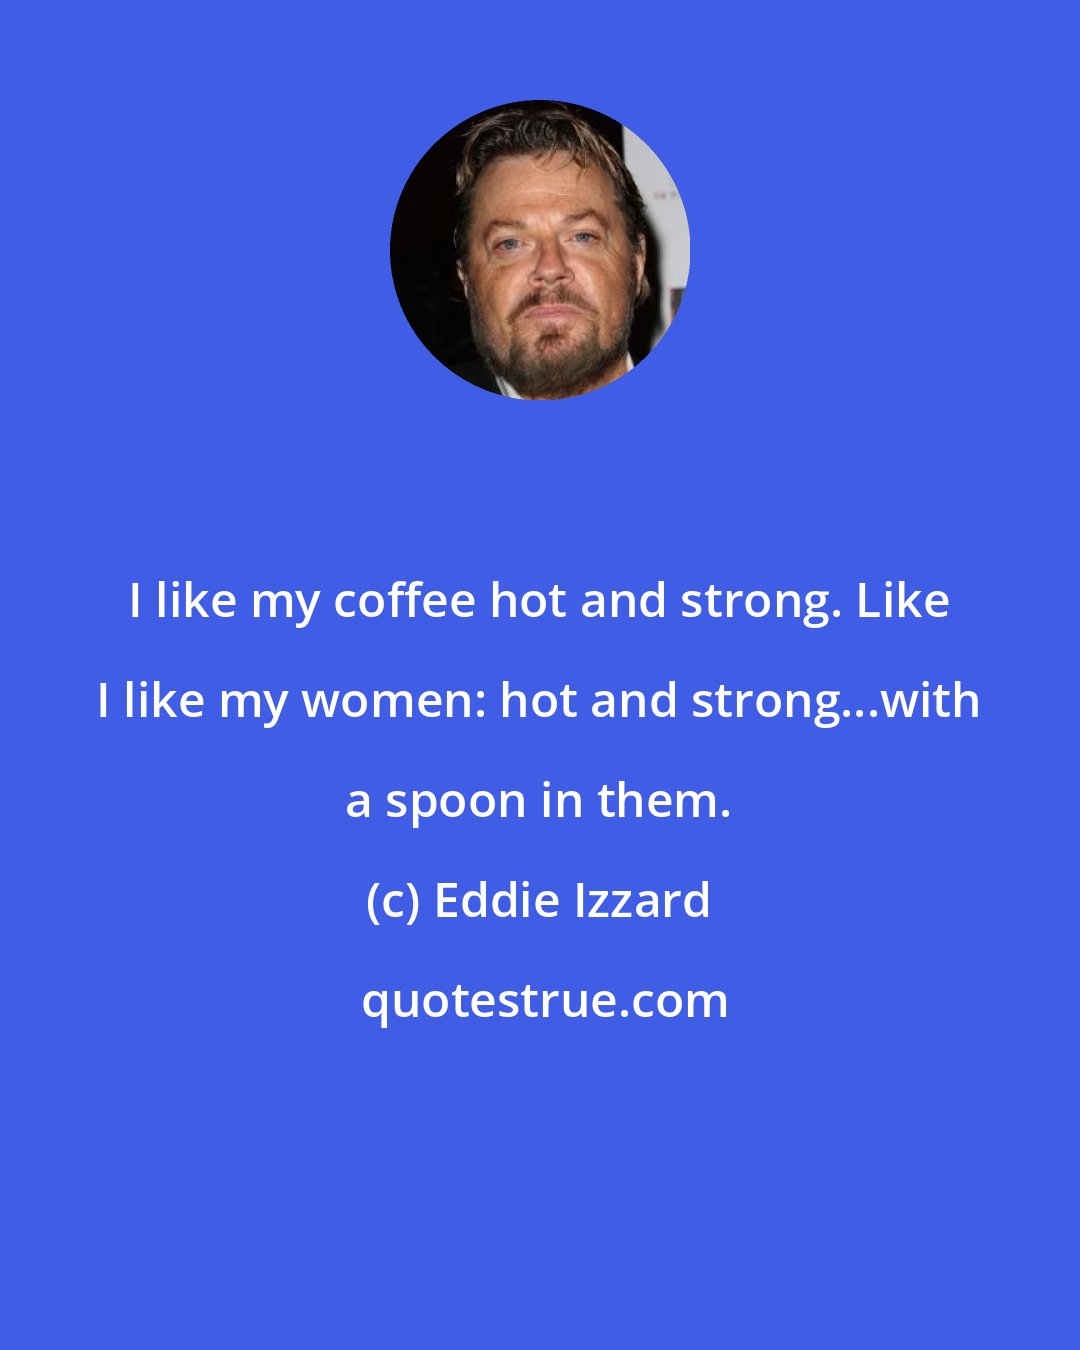 Eddie Izzard: I like my coffee hot and strong. Like I like my women: hot and strong...with a spoon in them.